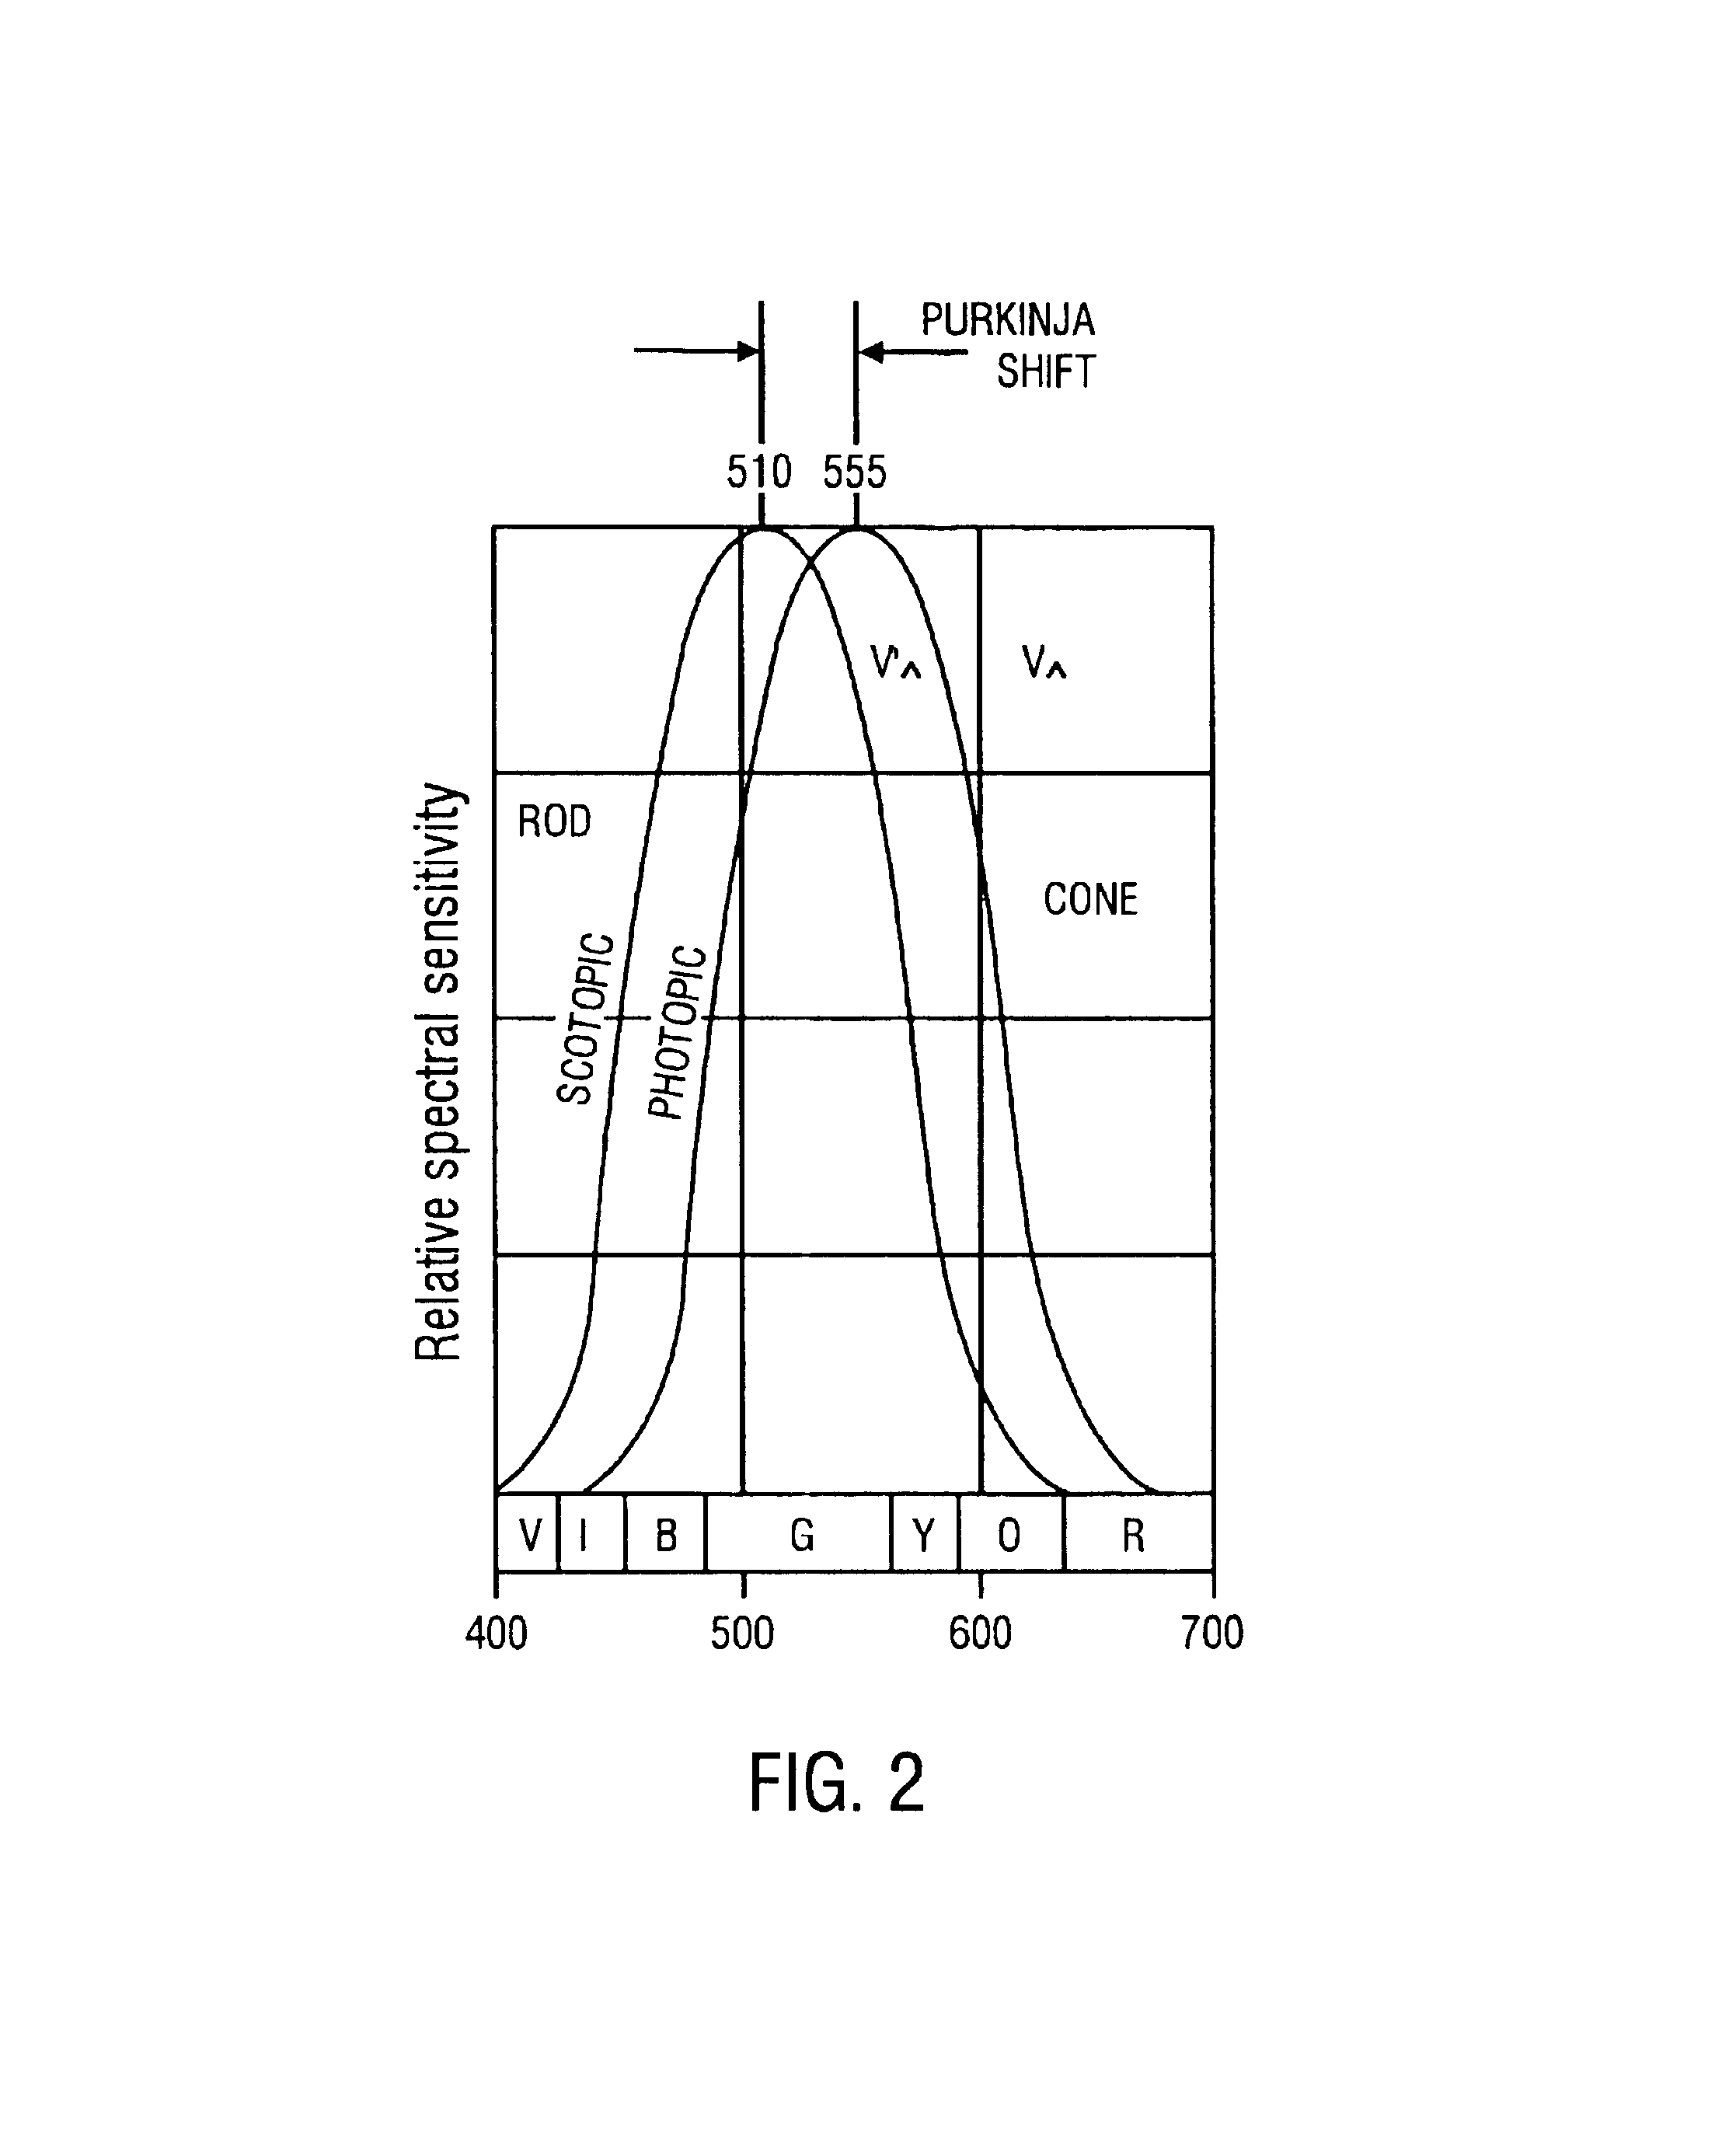 Matching of a reduced spectrum lighting source with video encoding program variables for increased data compression ratios